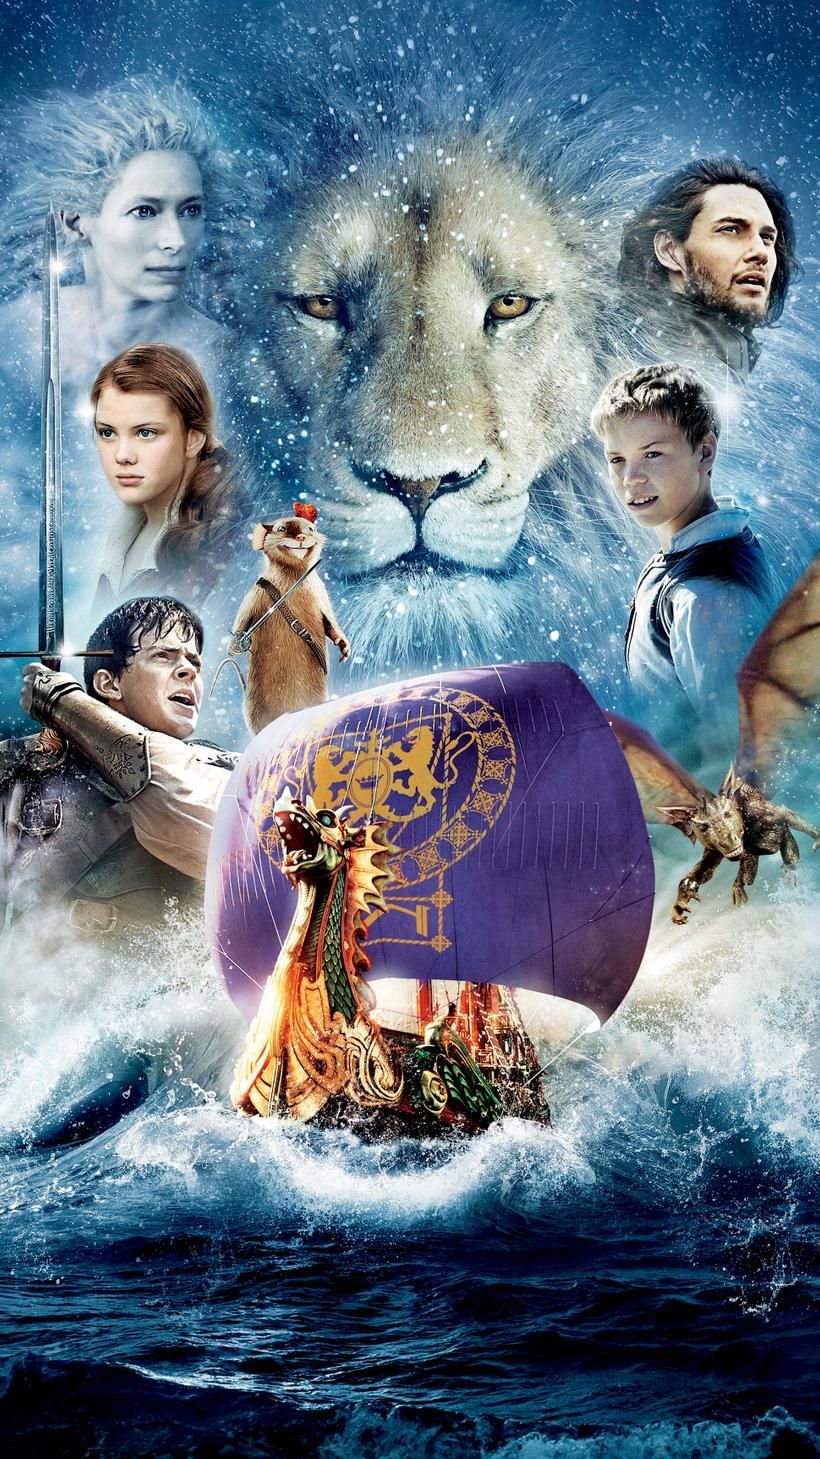 Harry Potter and the Philosopher's Stone (2001) Phone Wallpaper. Moviemania. Chronicles of narnia, Narnia, Wallpaper